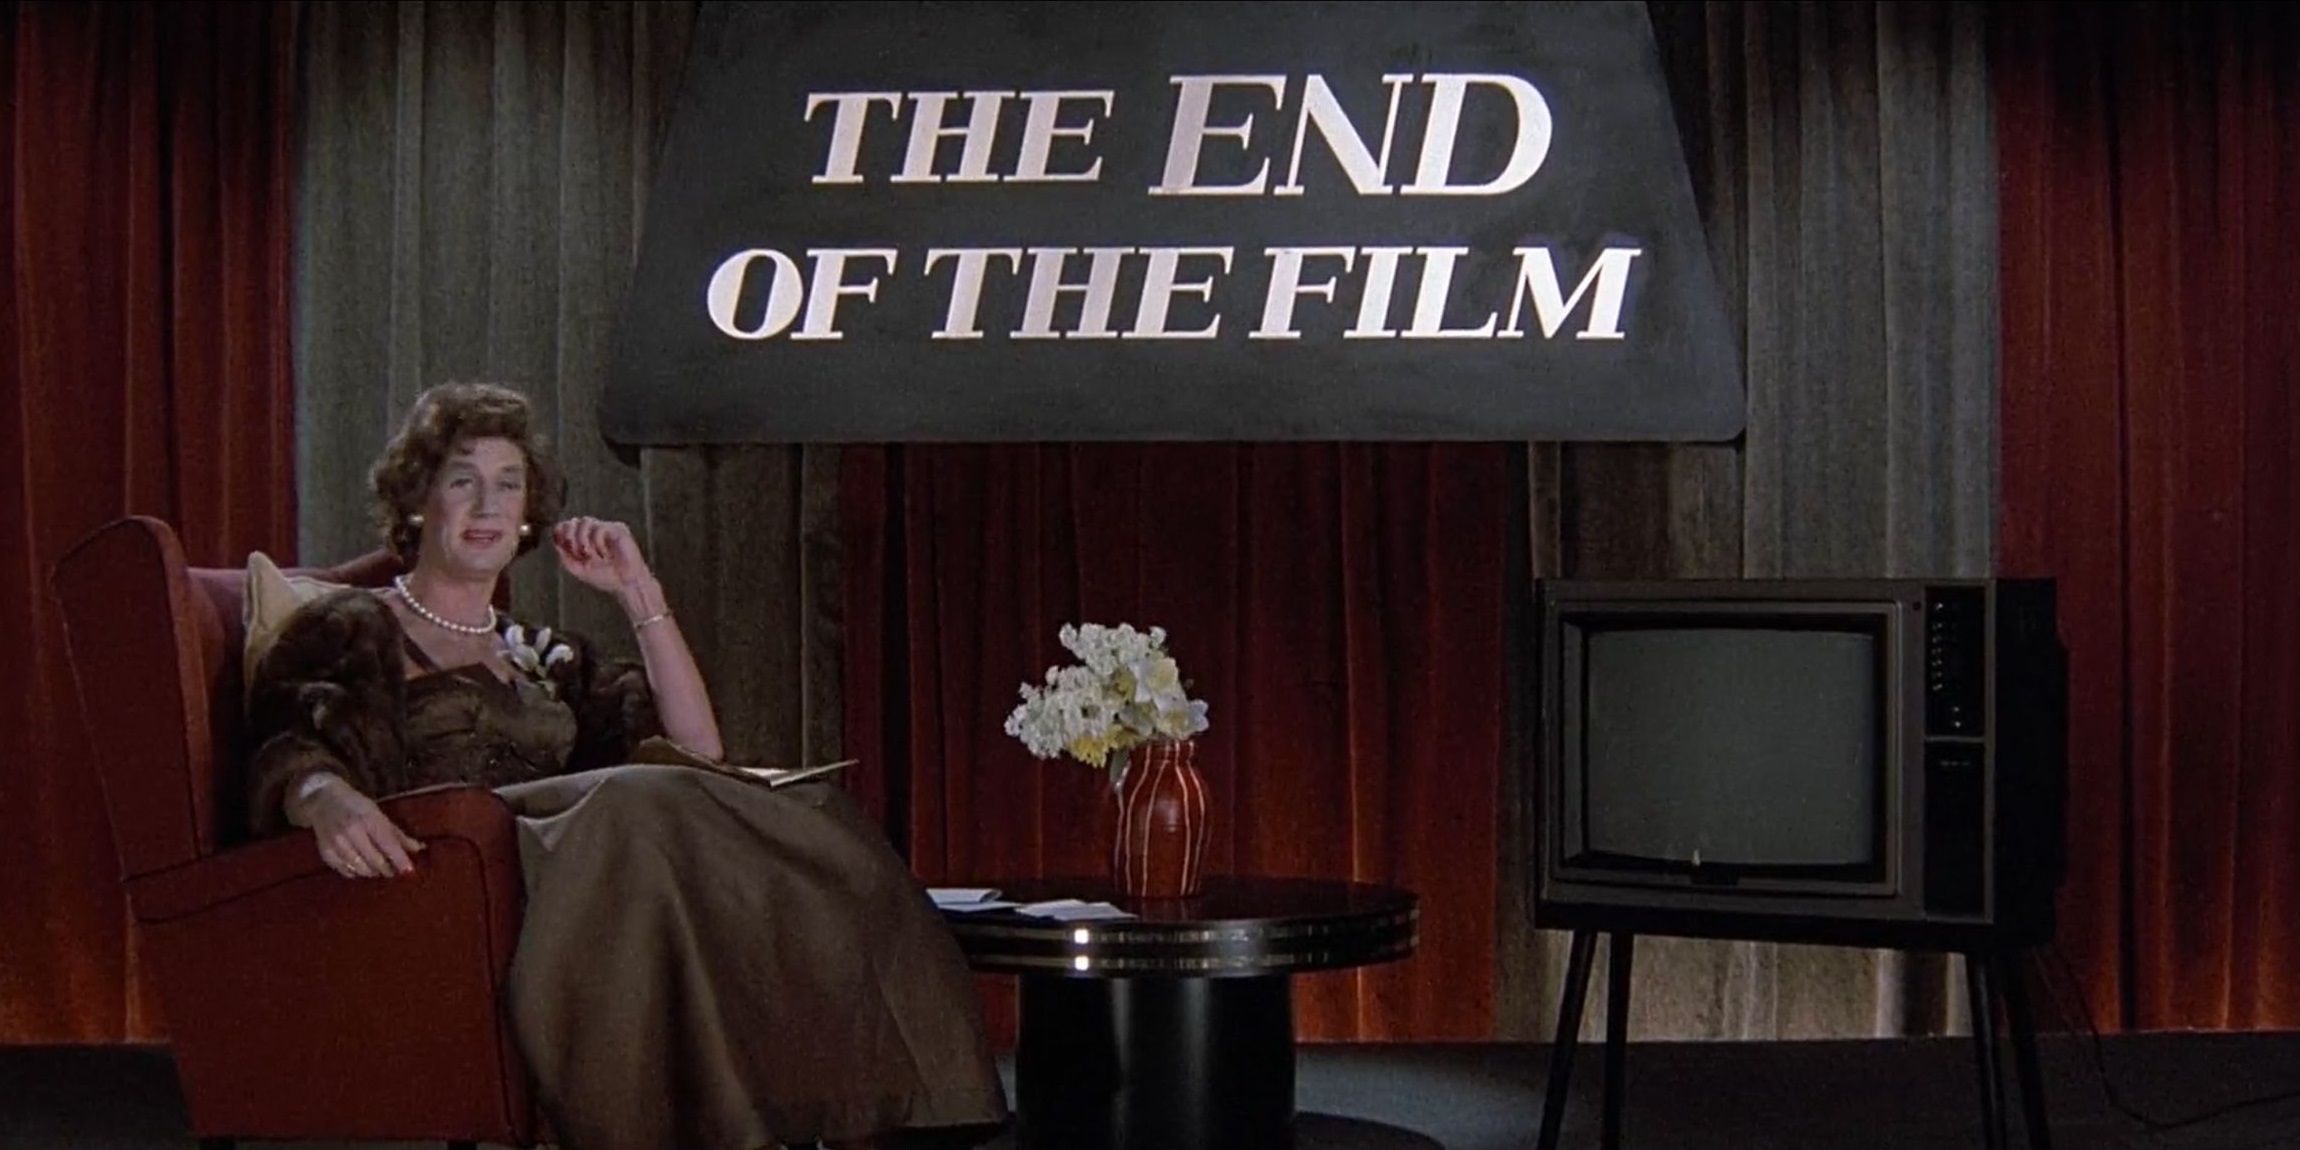 The End of the Film in Monty Python's The Meaning of Life